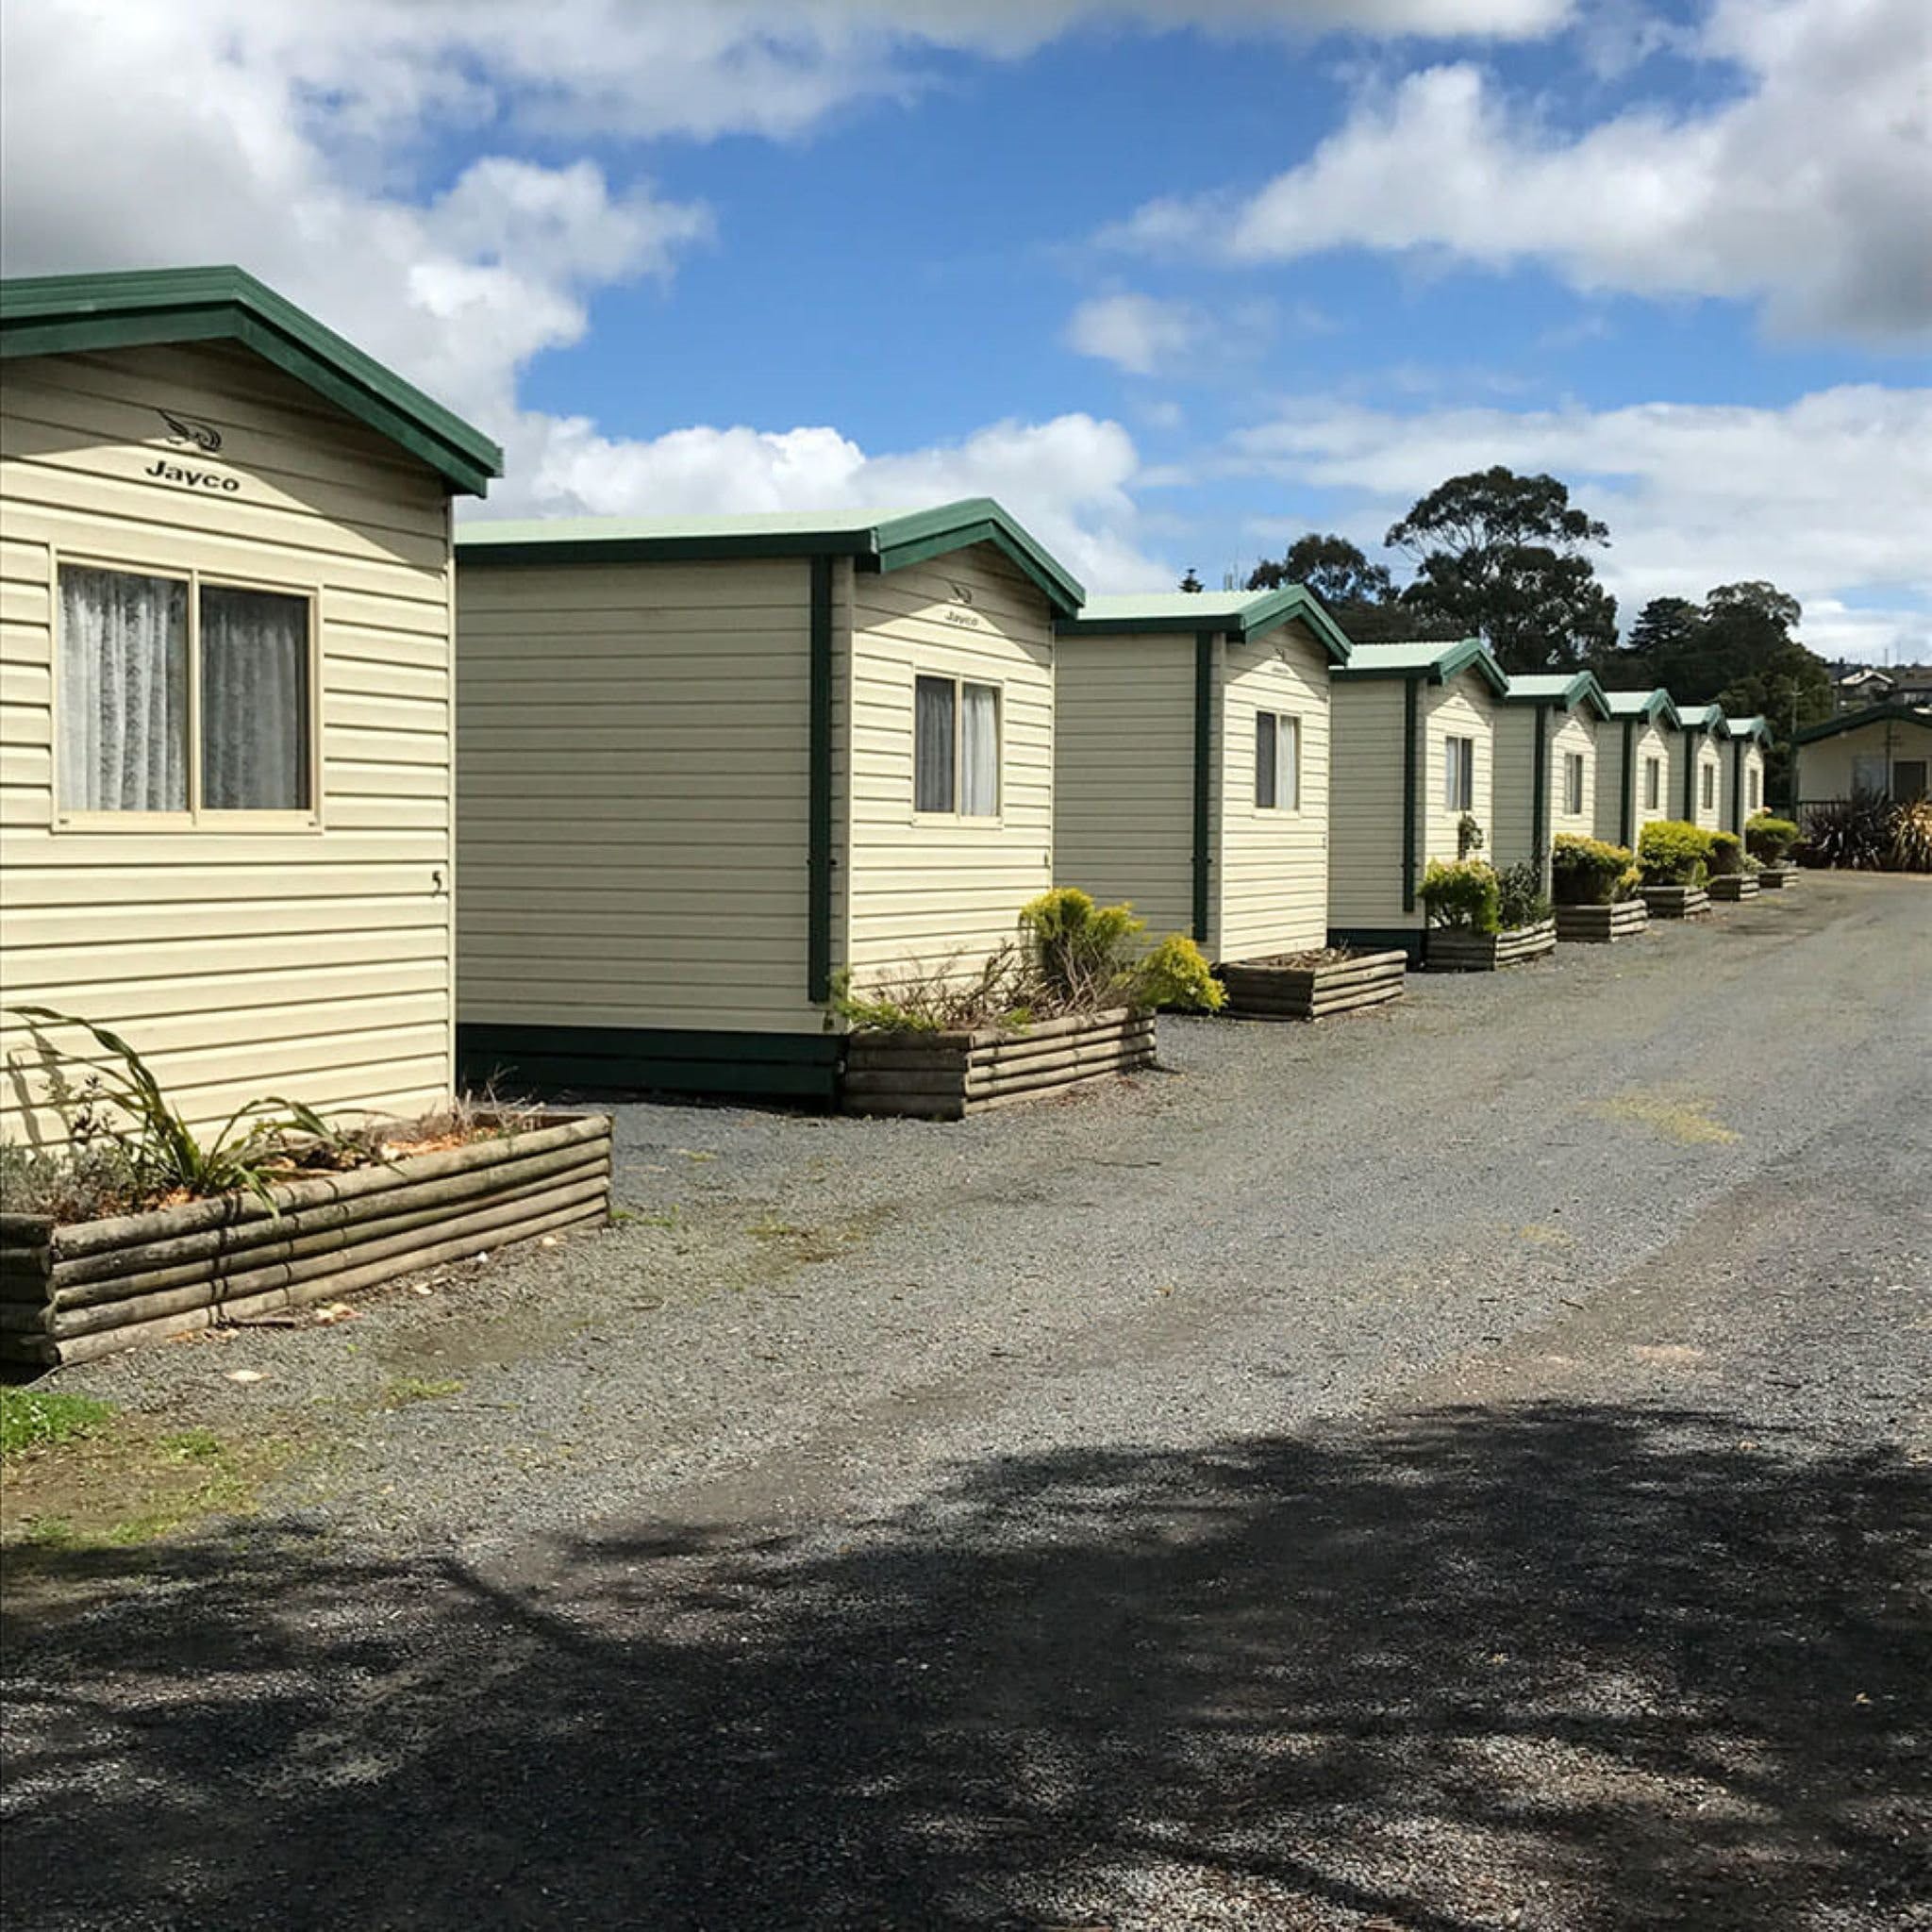 Prom Central Caravan Park - Dalby Accommodation